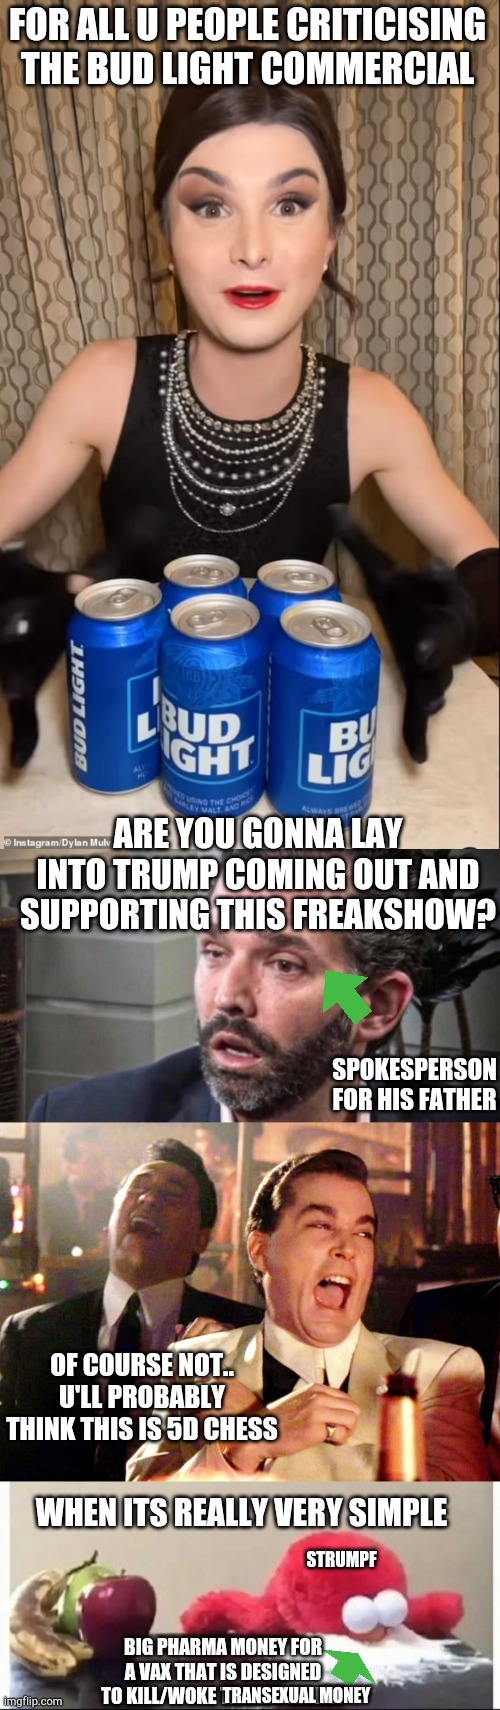 Anheuser-busch is sponsored by the globalist WEF. So is Strumpf. | TRANSEXUAL MONEY | image tagged in bud lite,go big or go woke,strumpf,elmo cocaine,donald trump jr cocaine | made w/ Imgflip meme maker